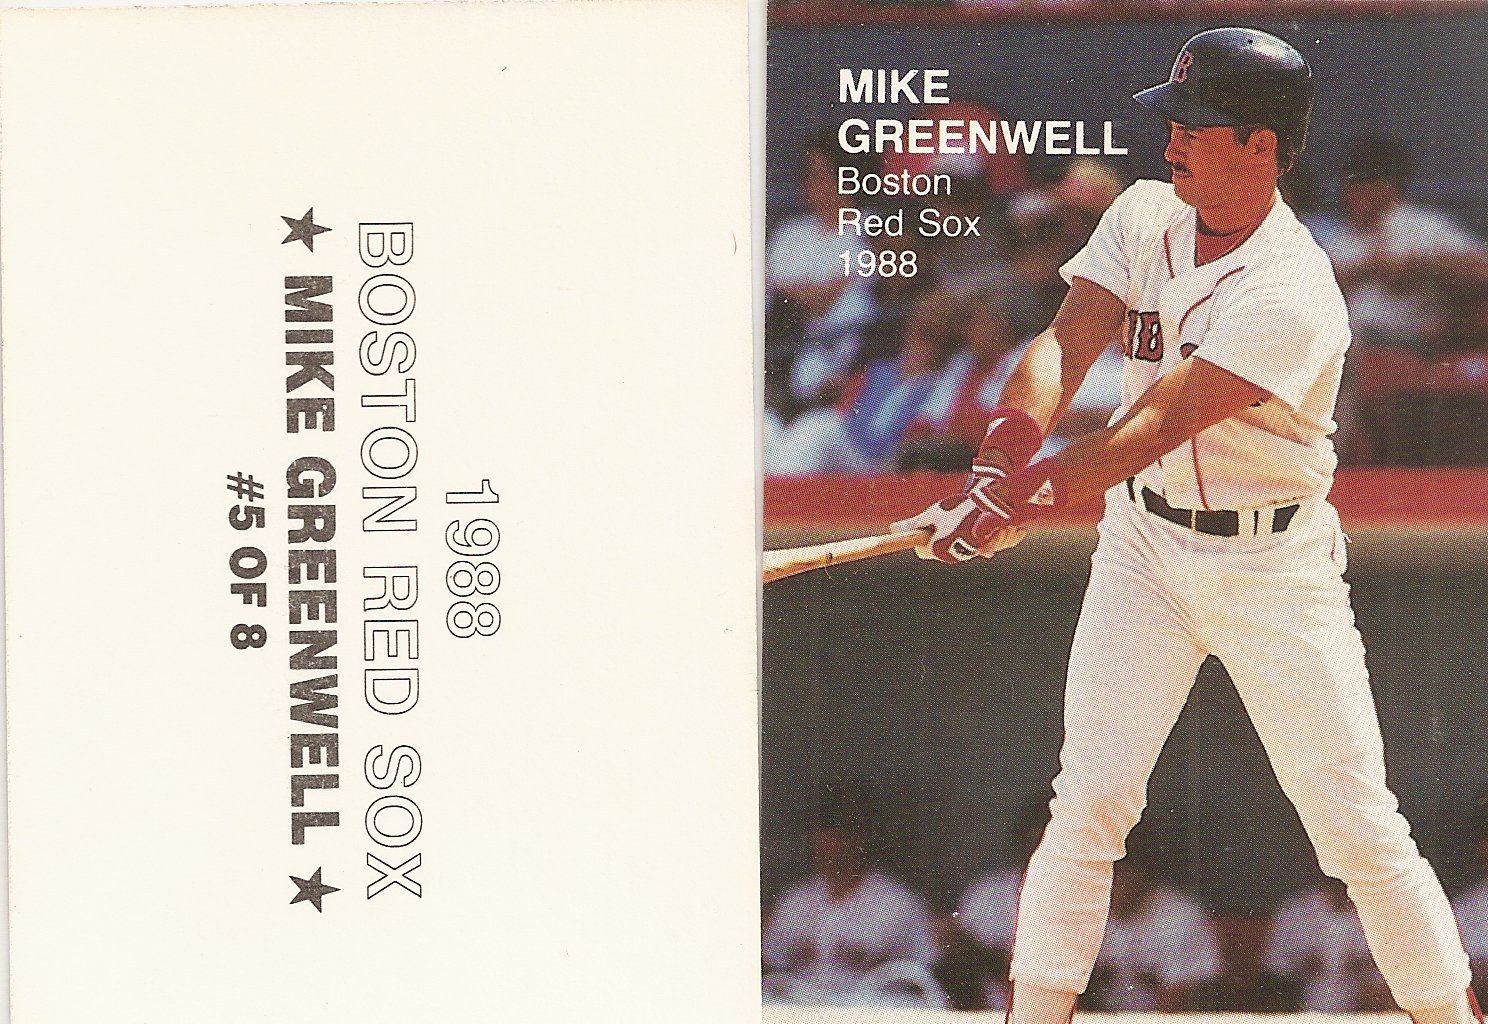 BOSTON RED SOX - Kenner Starting Lineup Card BLUE 1990  MIKE GREENWELL 